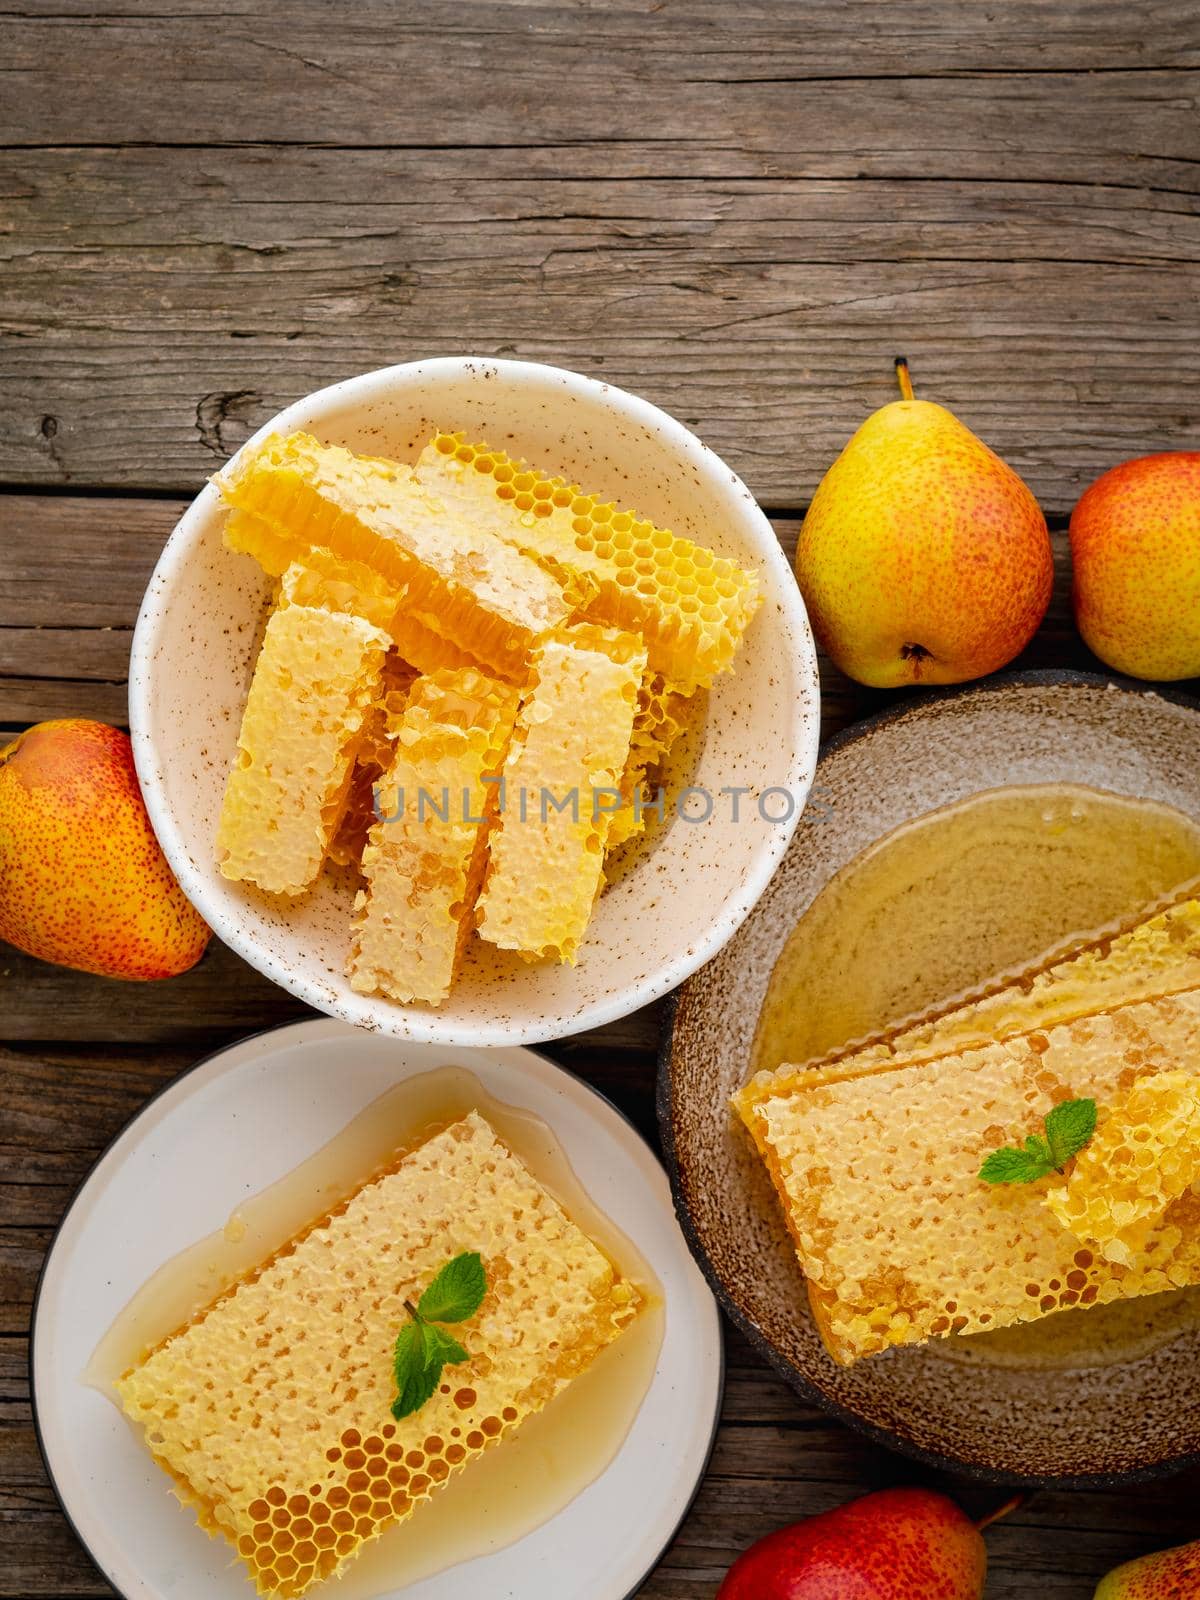 honey in honeycomb, close-up, on brown ceramic plate, on old gray wooden rustic table, top view by NataBene